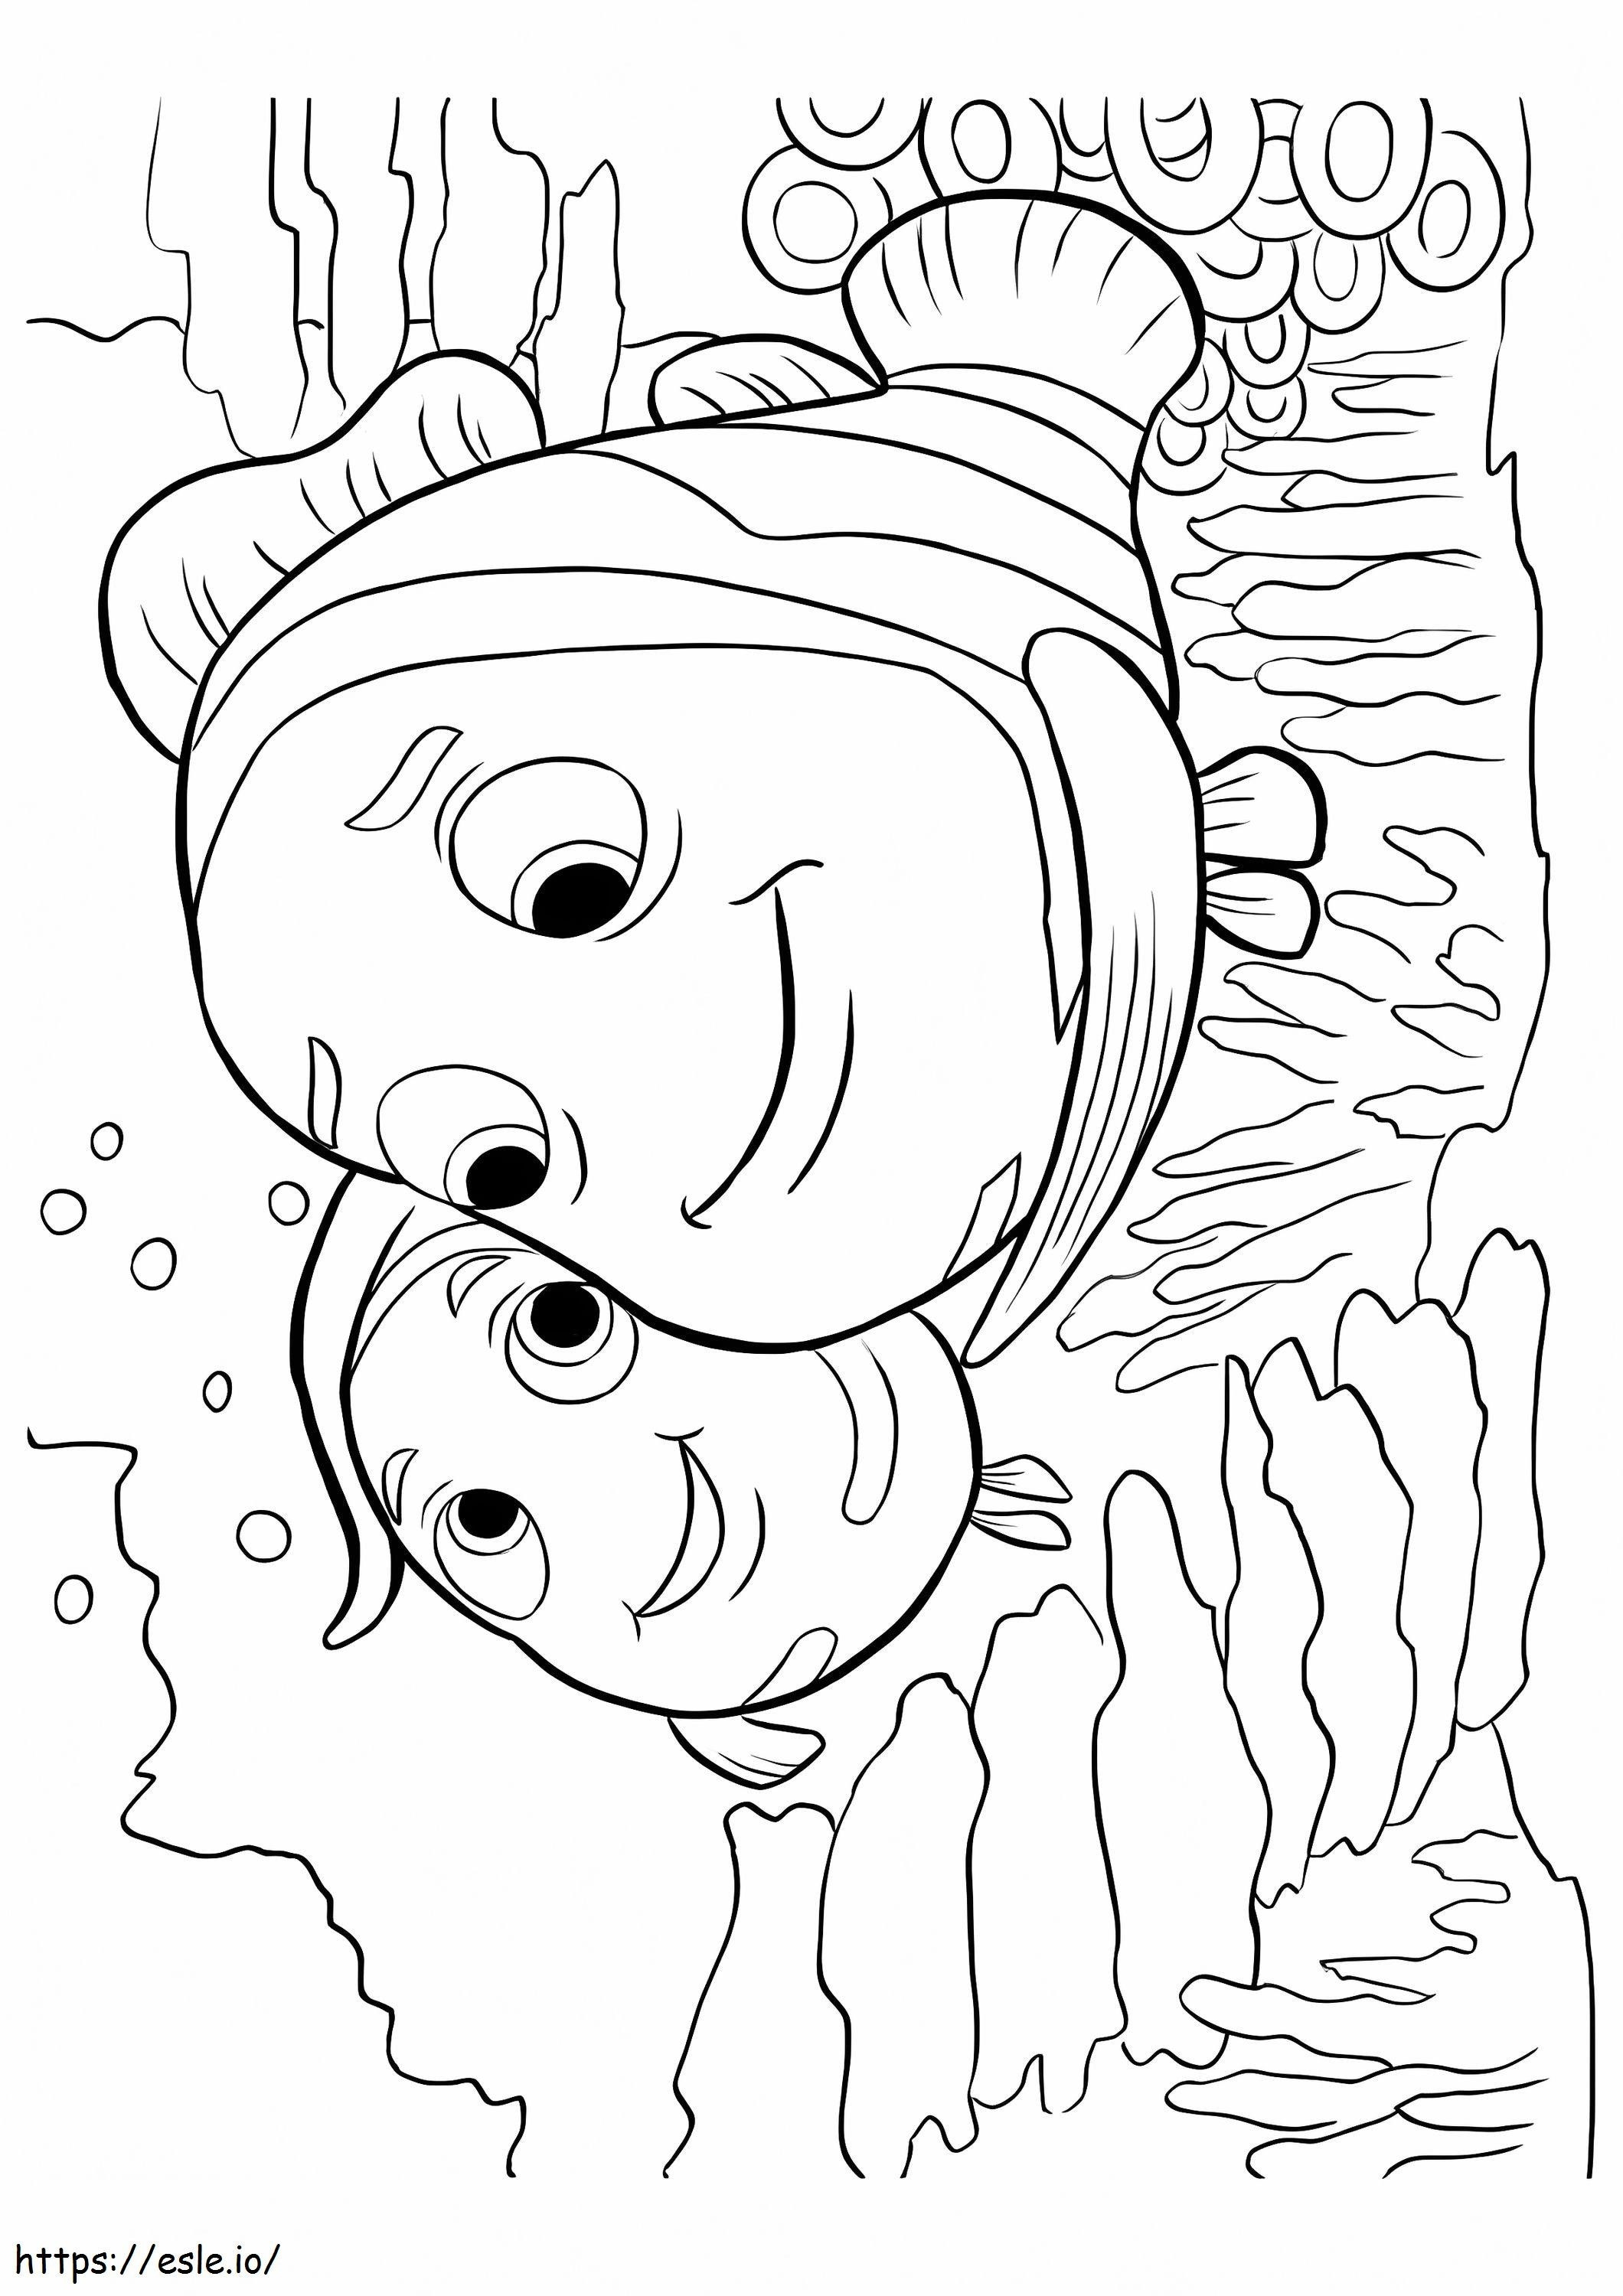 1526907360 The Nemo Coloring A4 coloring page